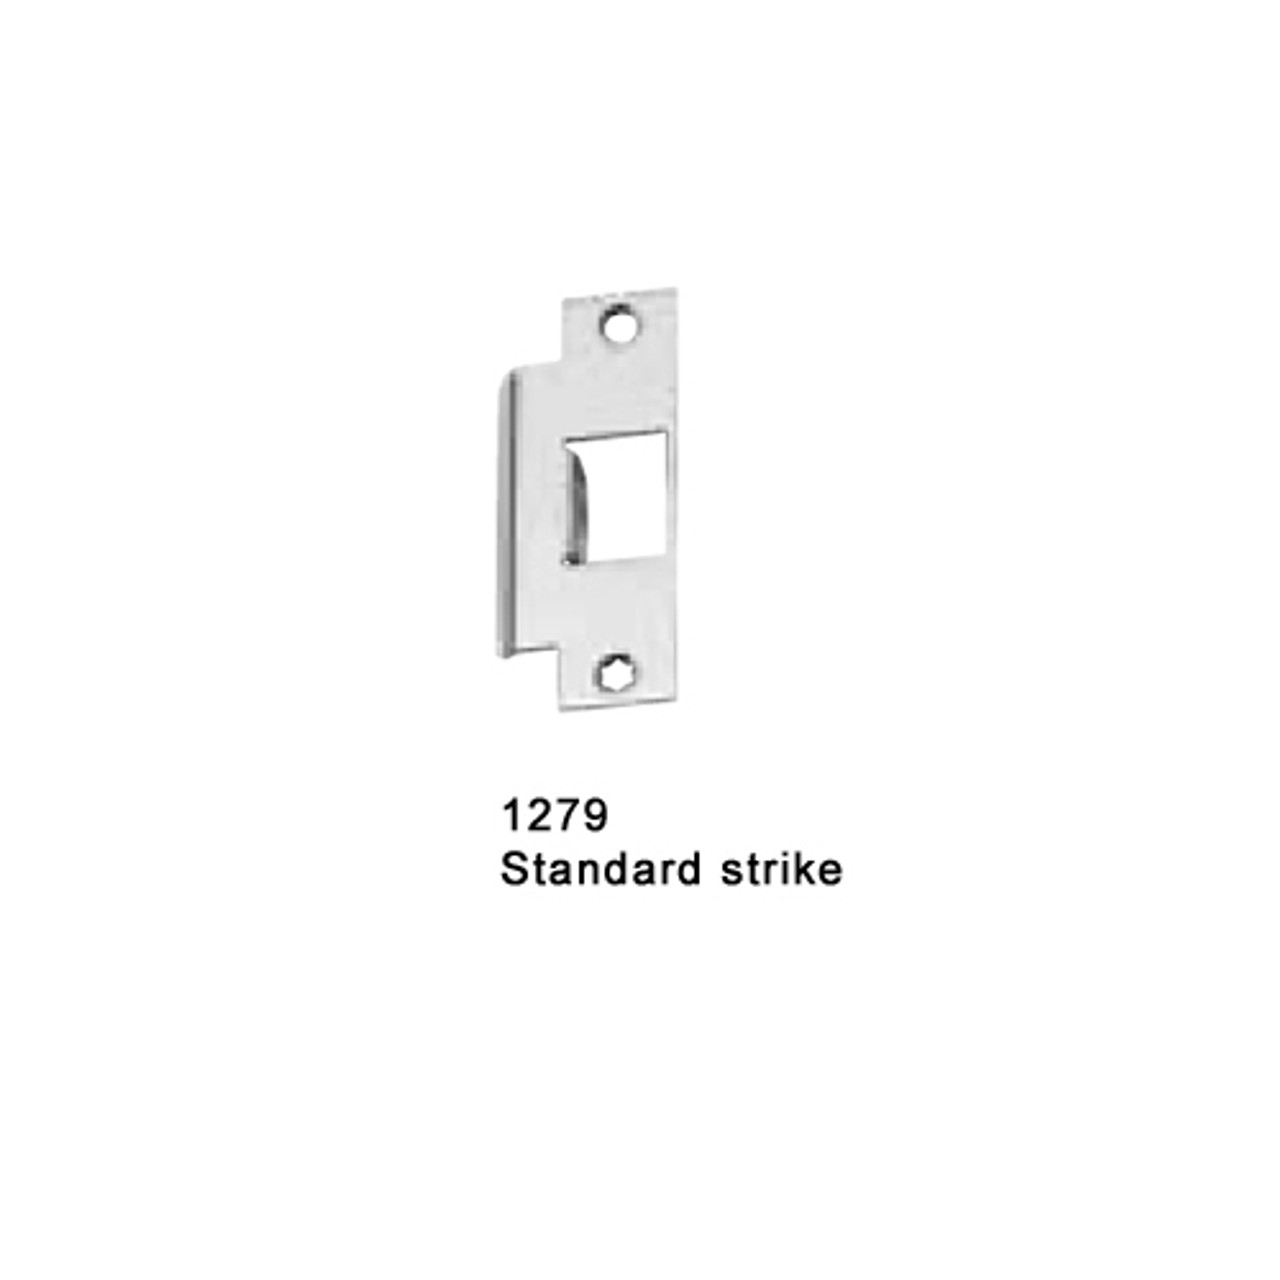 F-25-M-L-BE-Dane-US3-3-LHR Falcon 25 Series Fire Rated Mortise Lock Devices 510L-BE Dane Lever Trim with Blank Escutcheon in Polished Brass